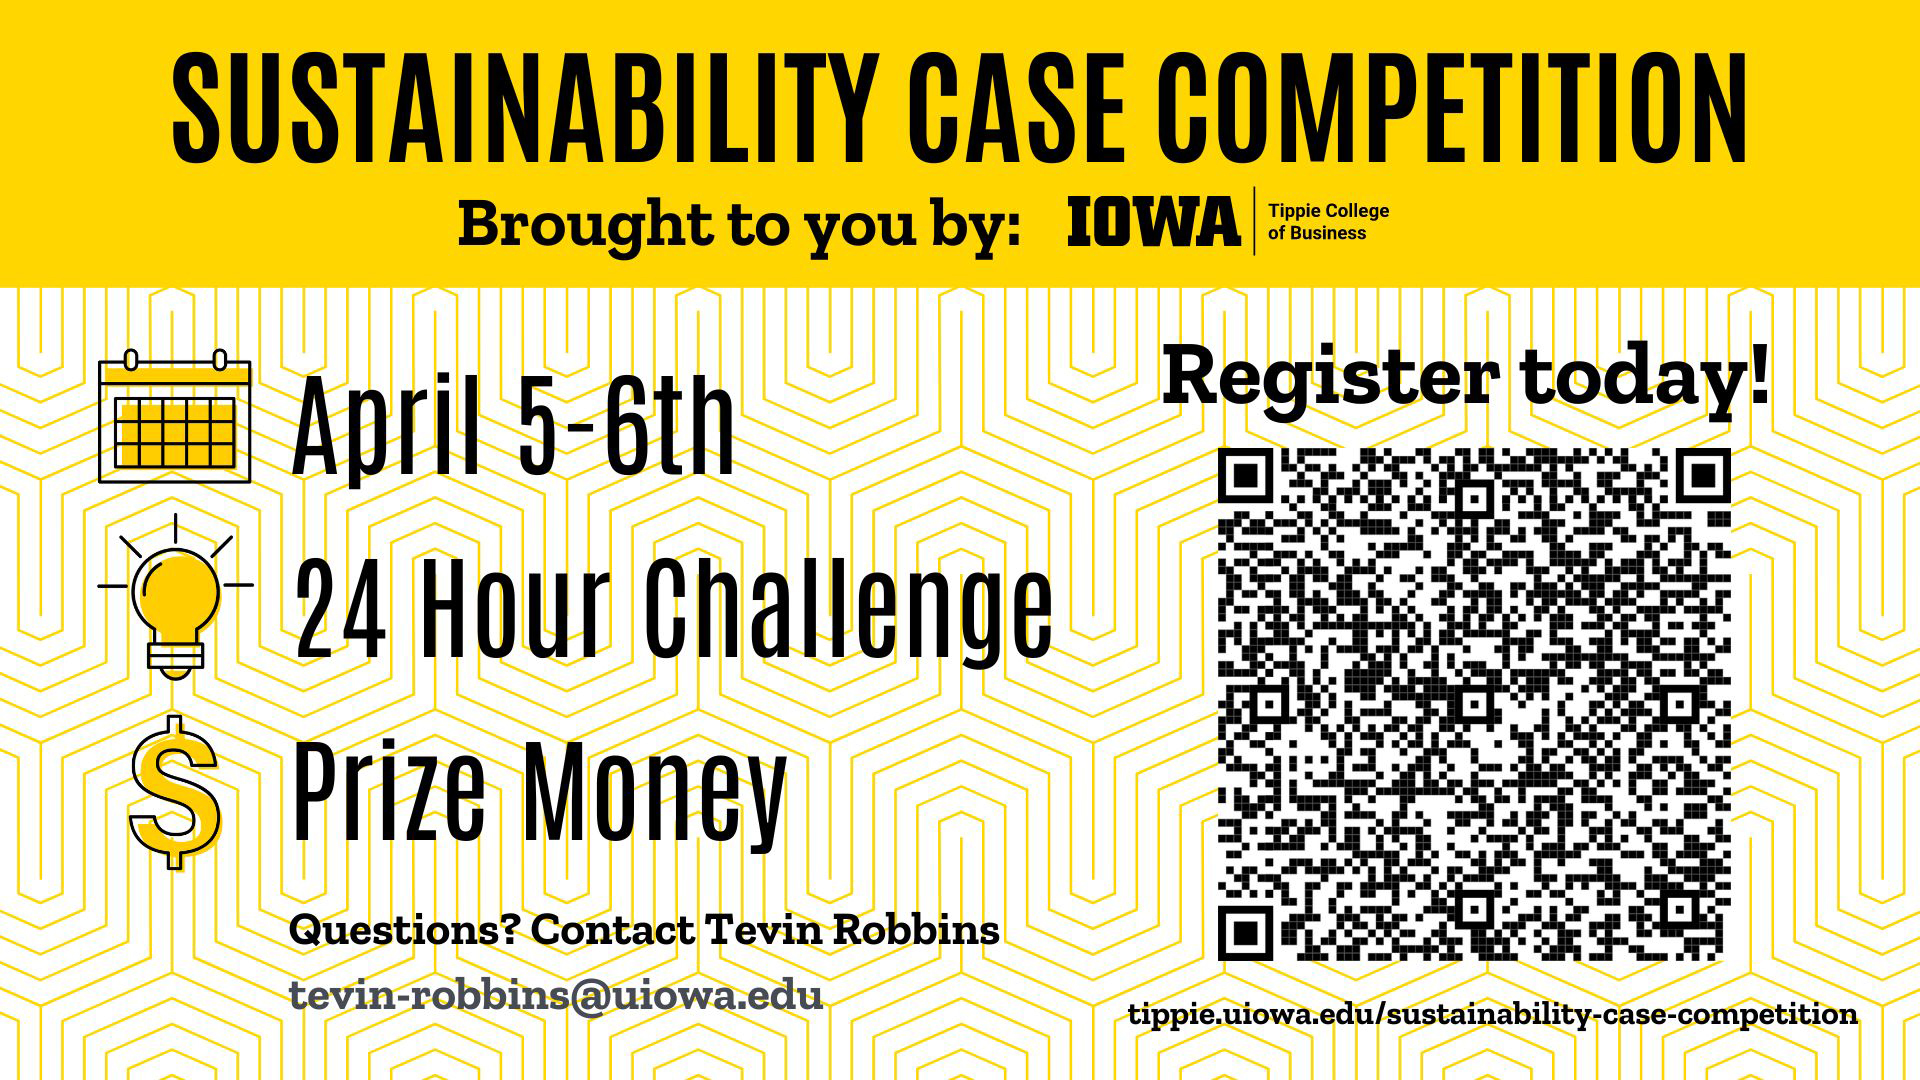 Tippie Sustainability Case Competition, April 5-6